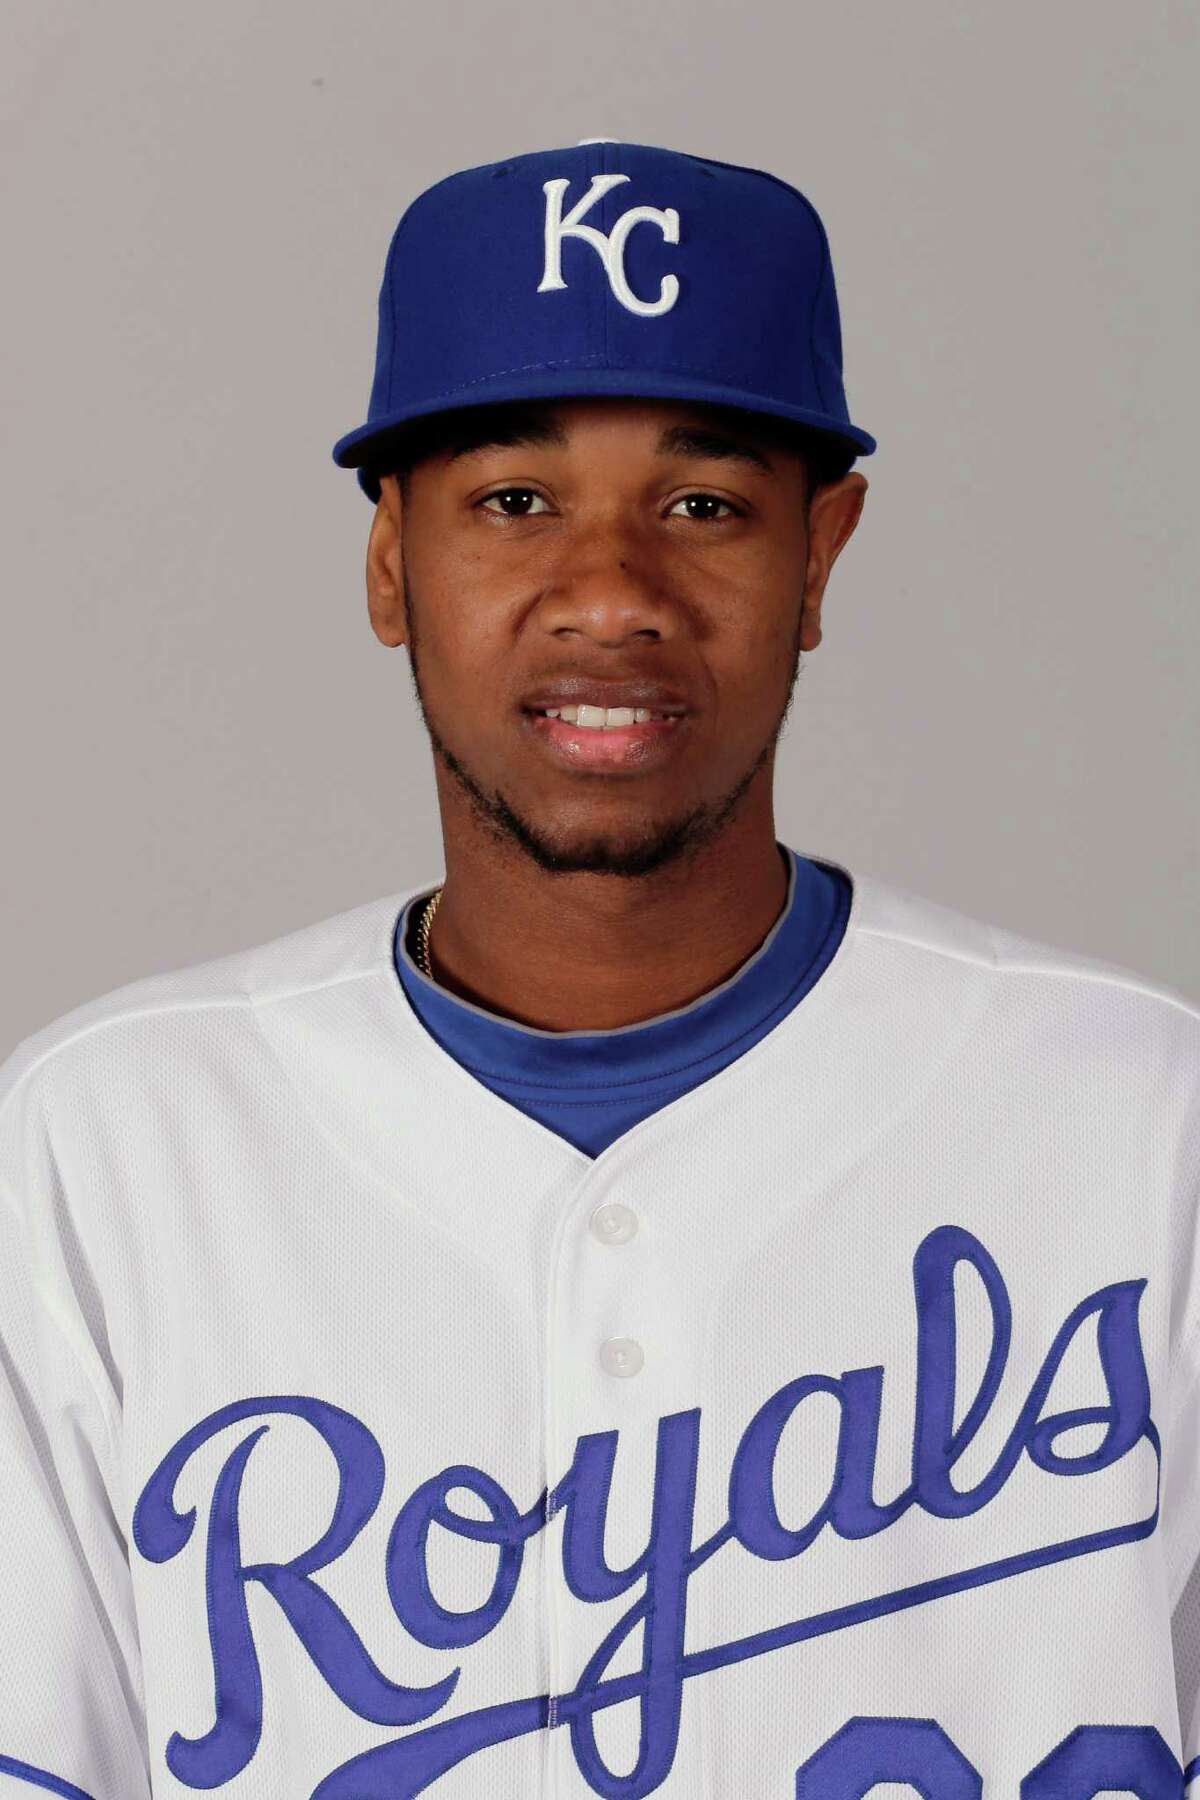 This is a 2016 photo of Yordano Ventura of the Kansas City Royals baseball team. This image reflects the Kansas City Royals active roster as of Thursday, Feb. 25, 2016, when this image was taken. (AP Photo/Charlie Riedel)